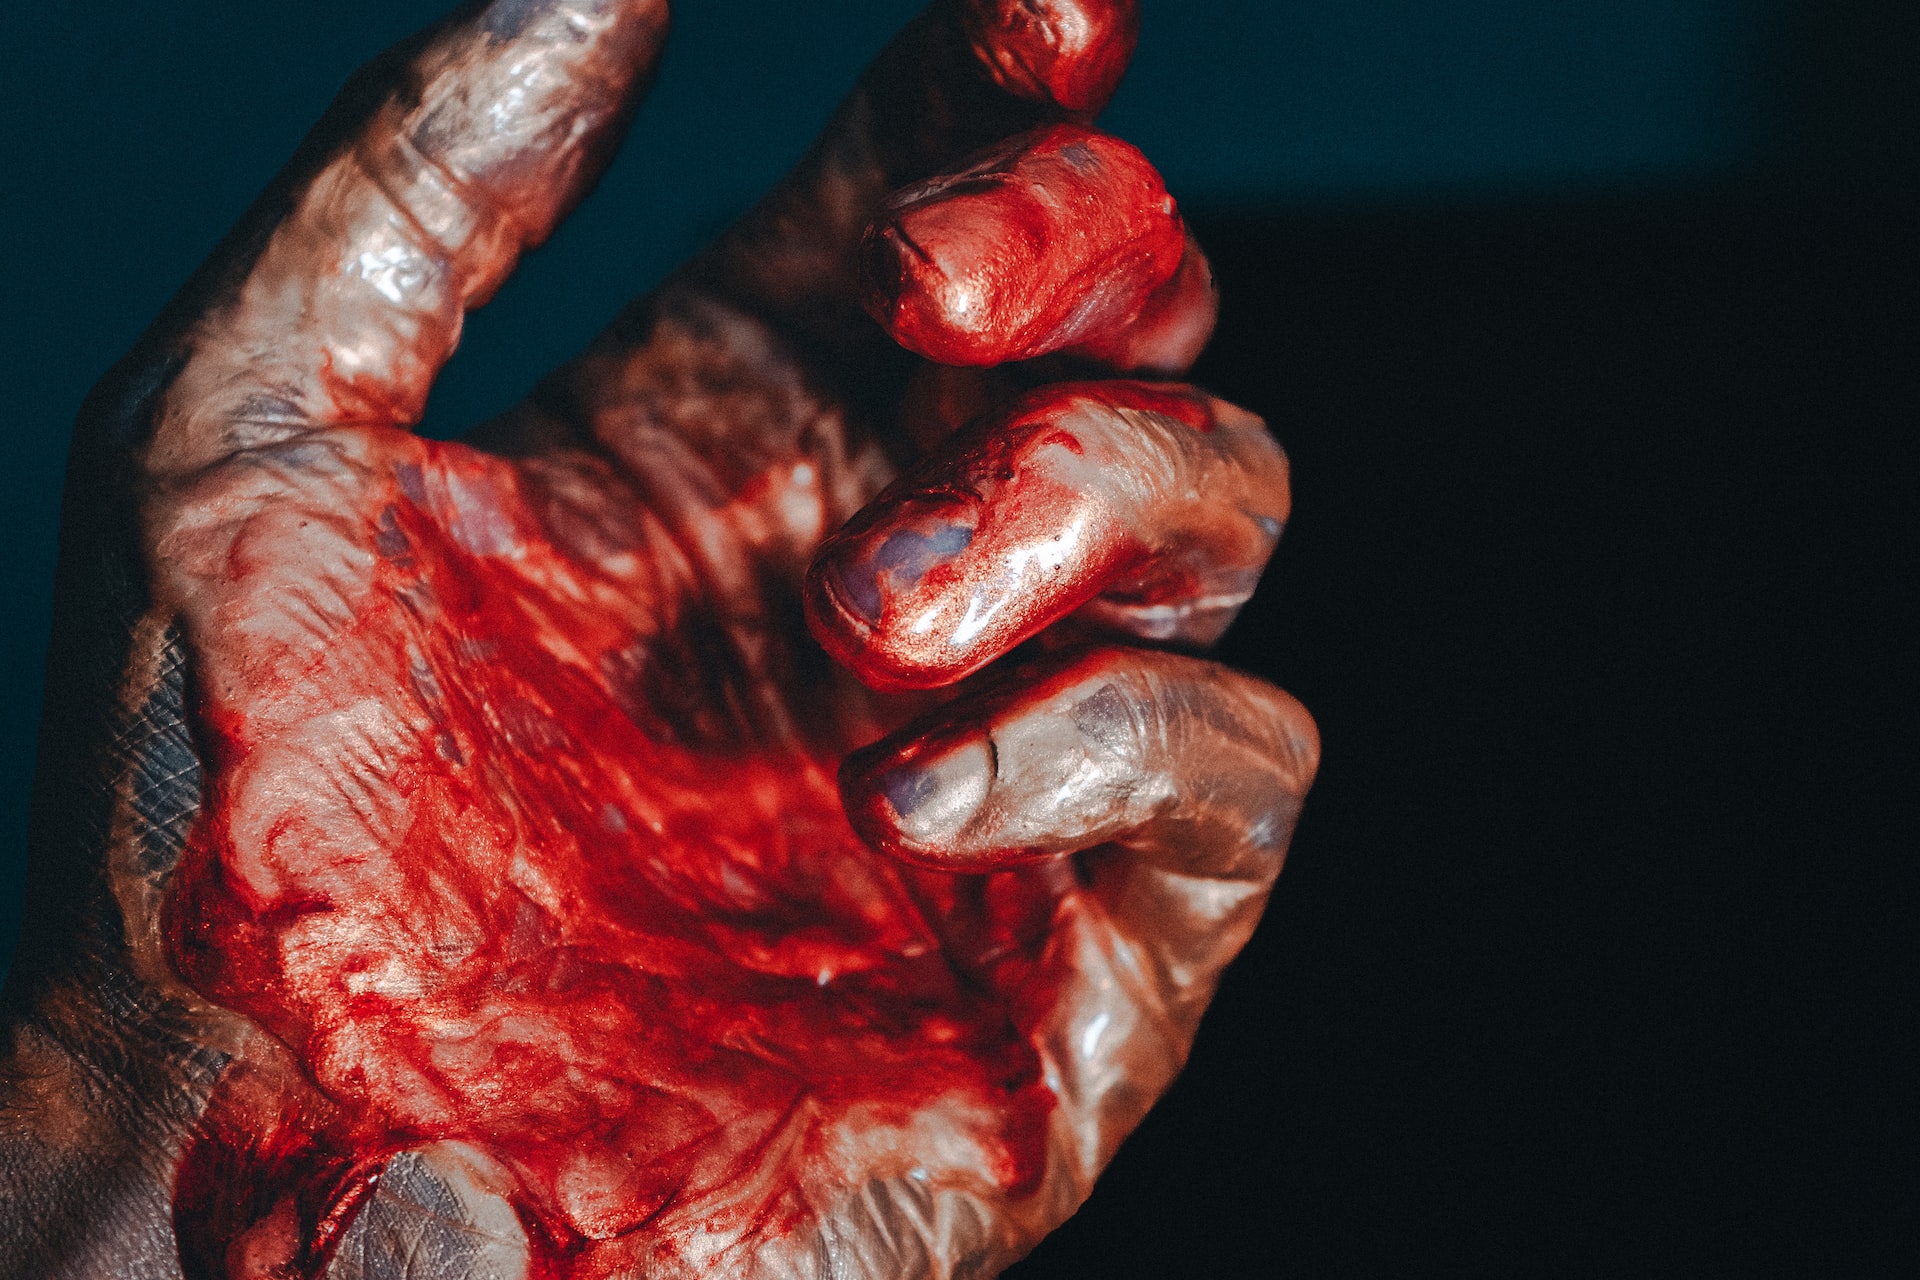 A Hand Covered With Blood